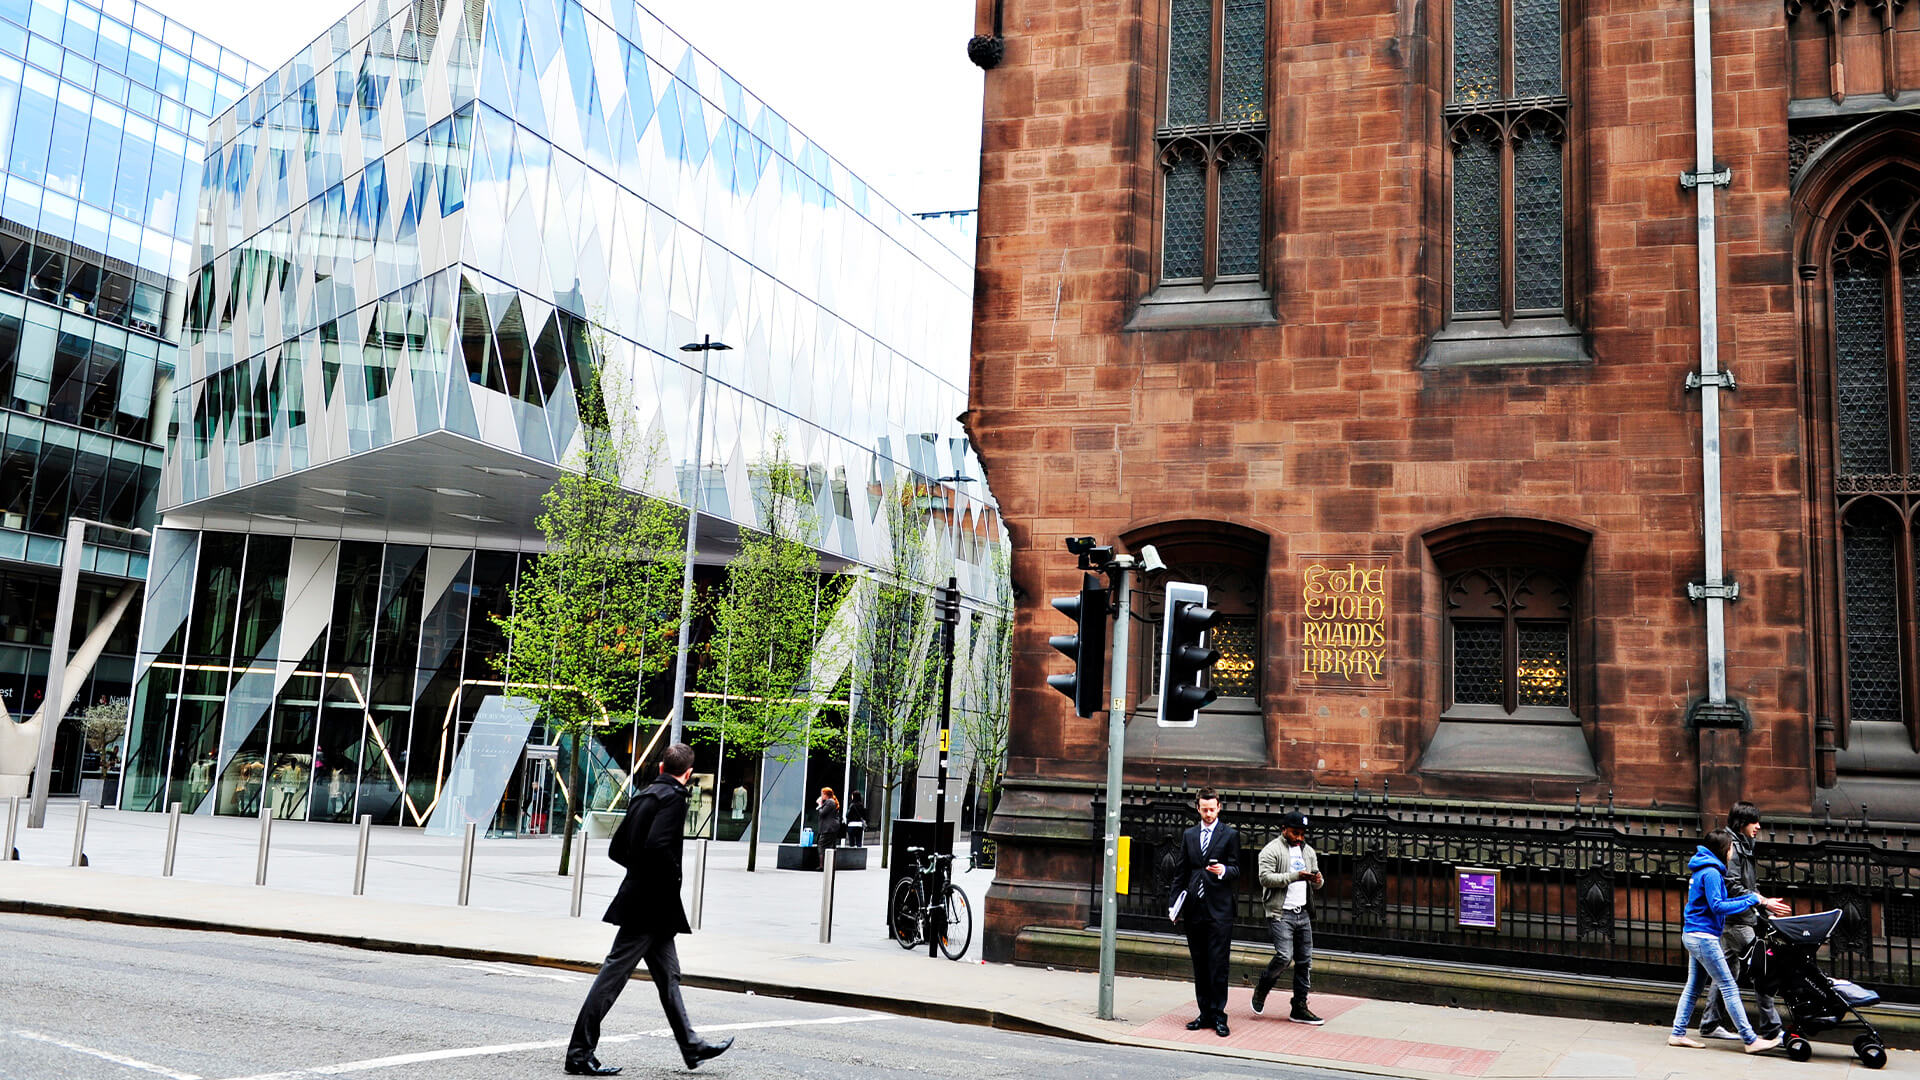 Historic and modern building on the University of Manchester campus